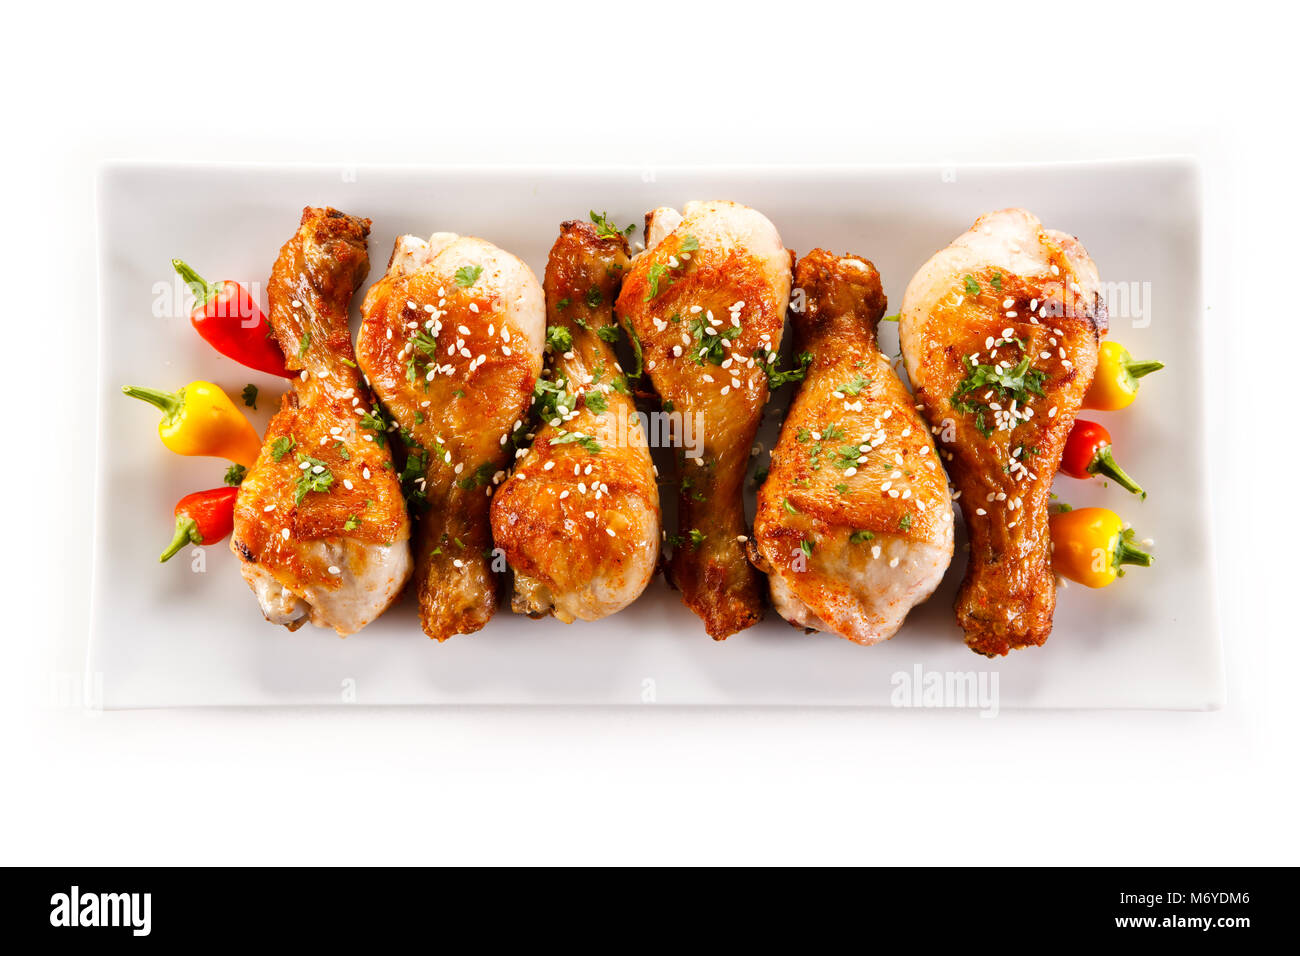 Roast chicken drumsticks and vegetables Stock Photo